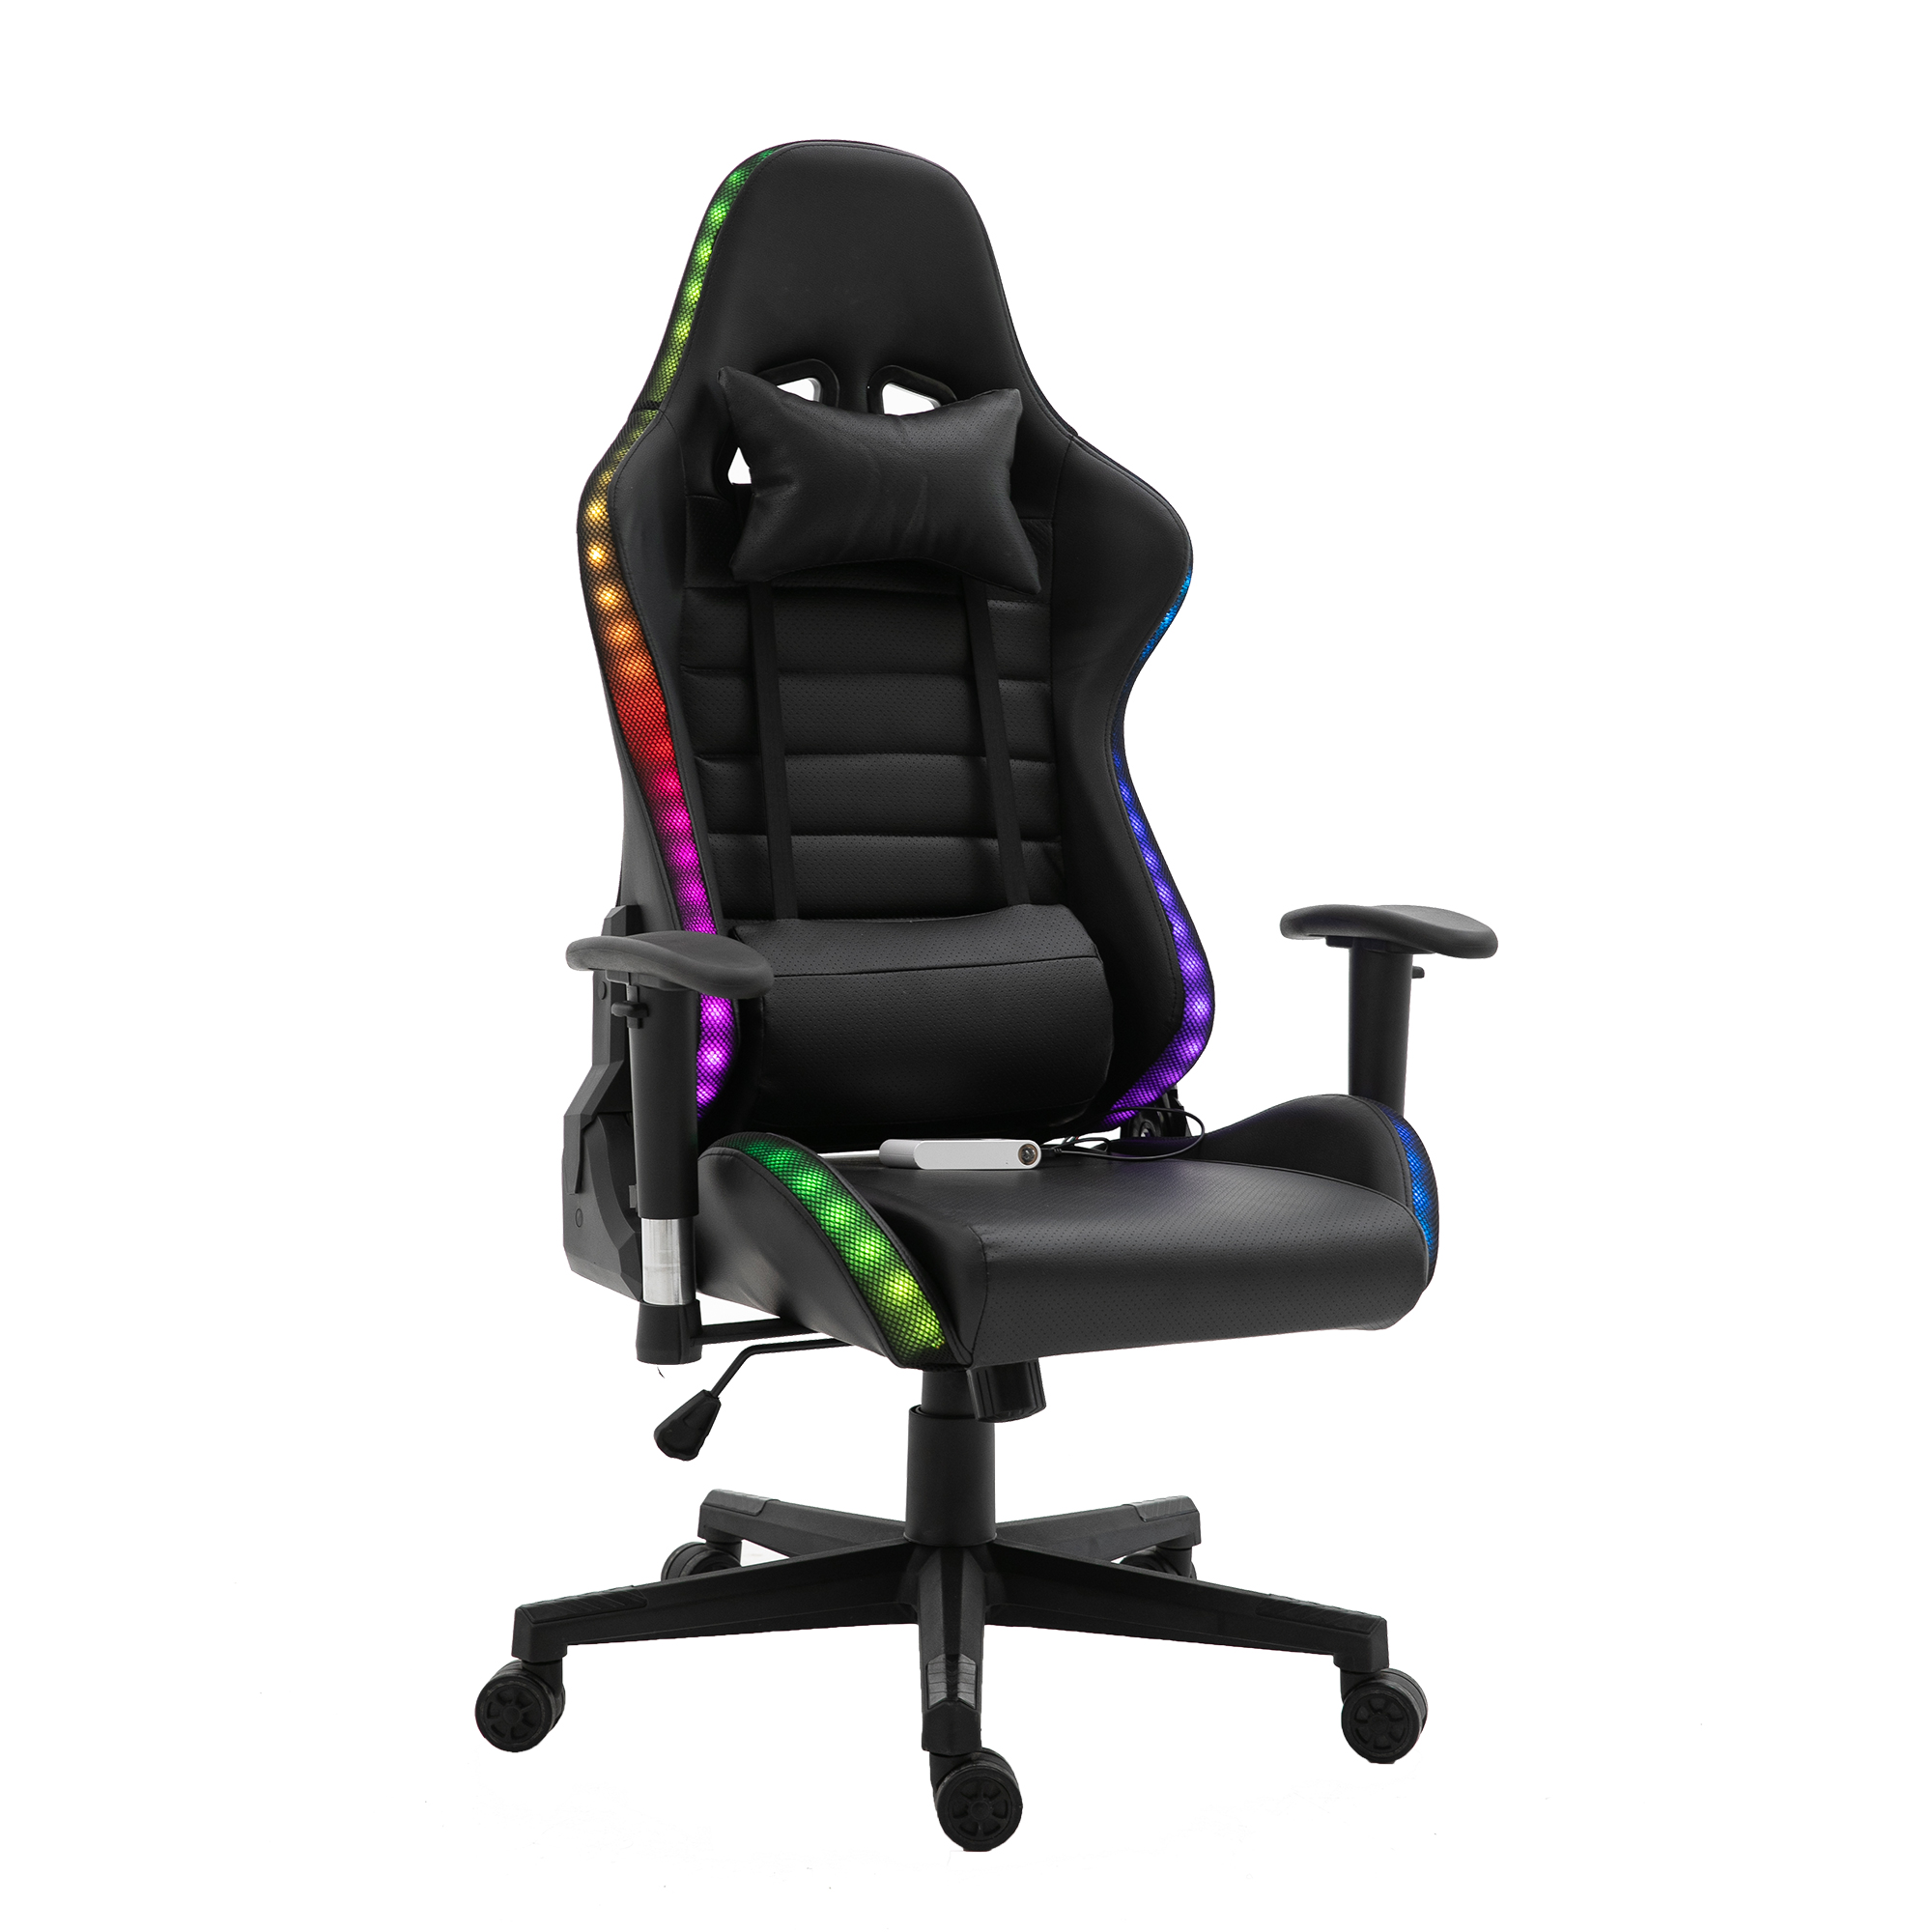 https://www.jifangfurniture.com/modern-wholesale-leather-reclining-gamer-chair-led-light-bar-racer-rgb-gaming-chair-product/